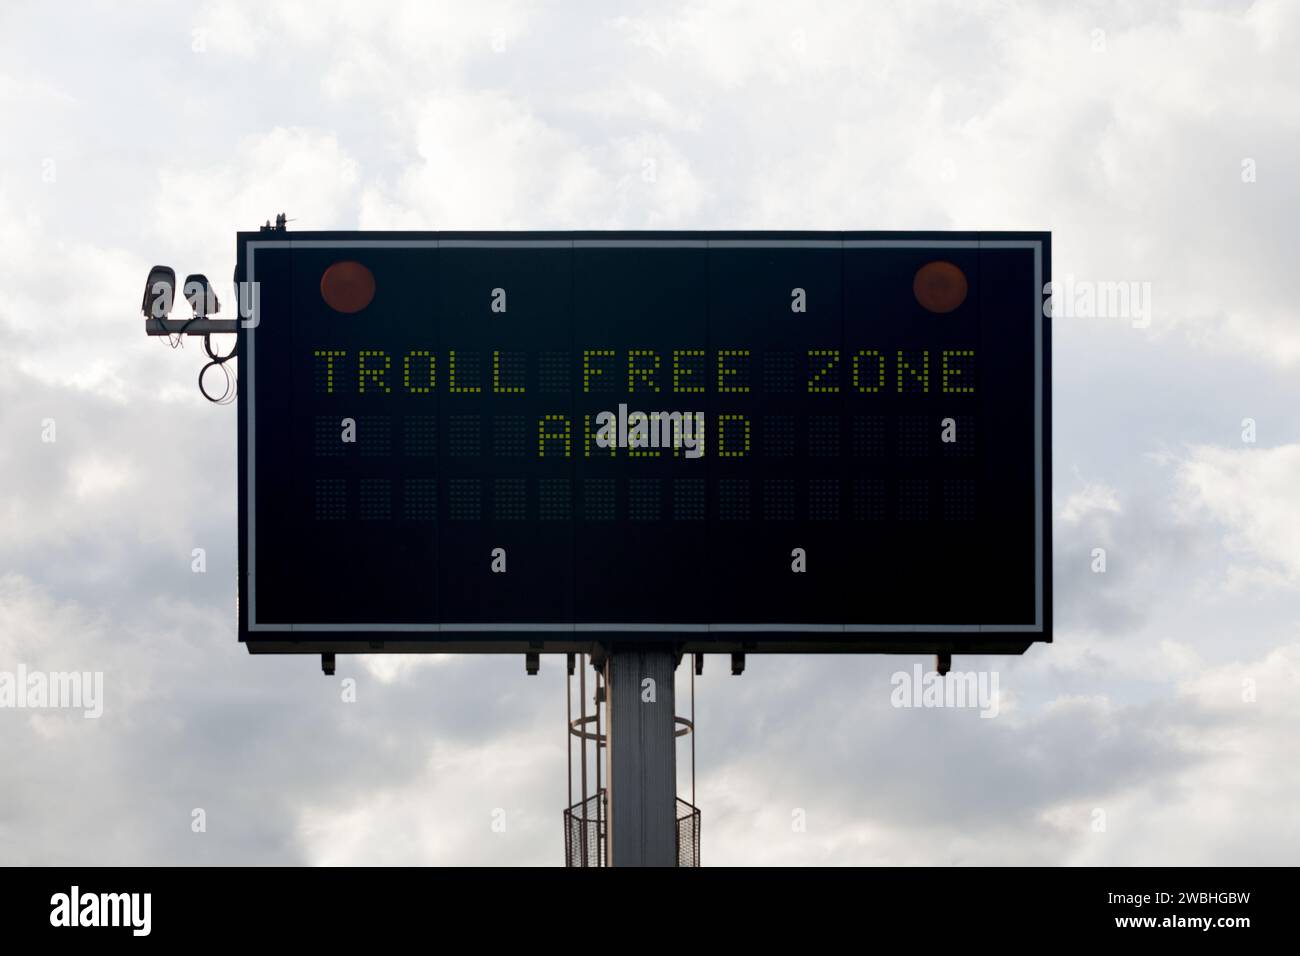 Information board on the road displaying the message “Bully Free Zone Ahead”. Stock Photo